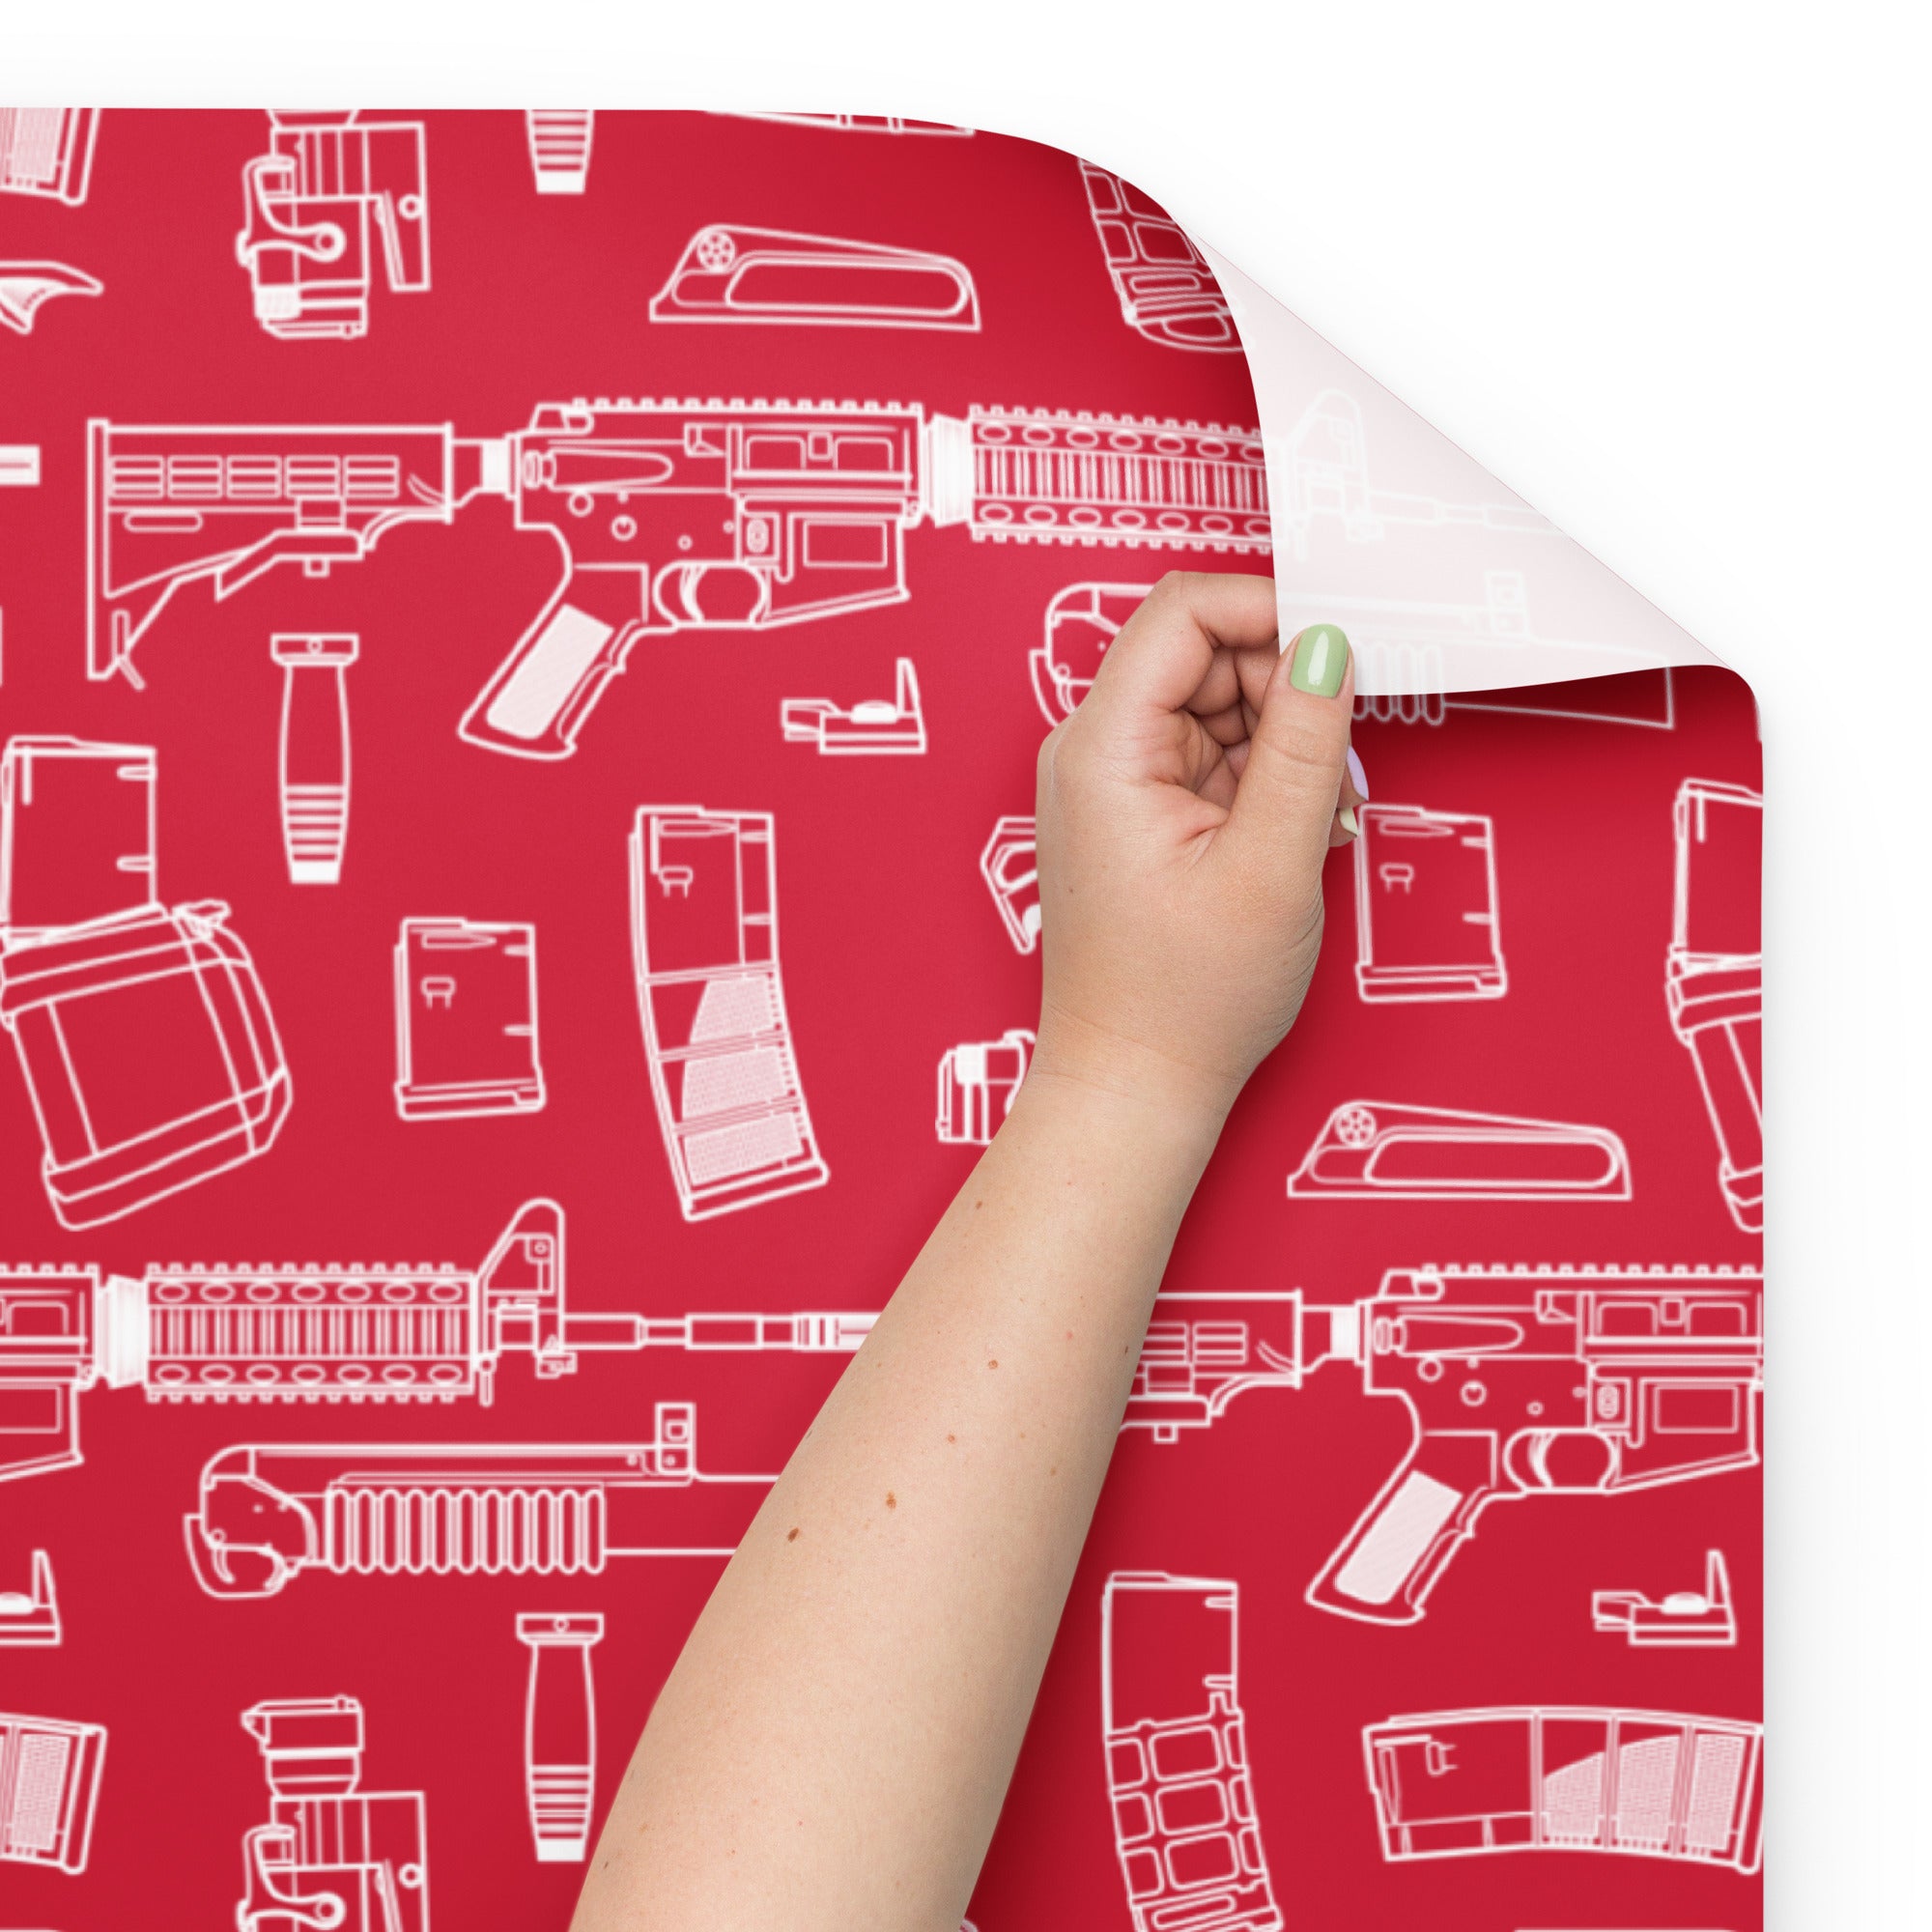 Rifle Parts Wrapping Paper